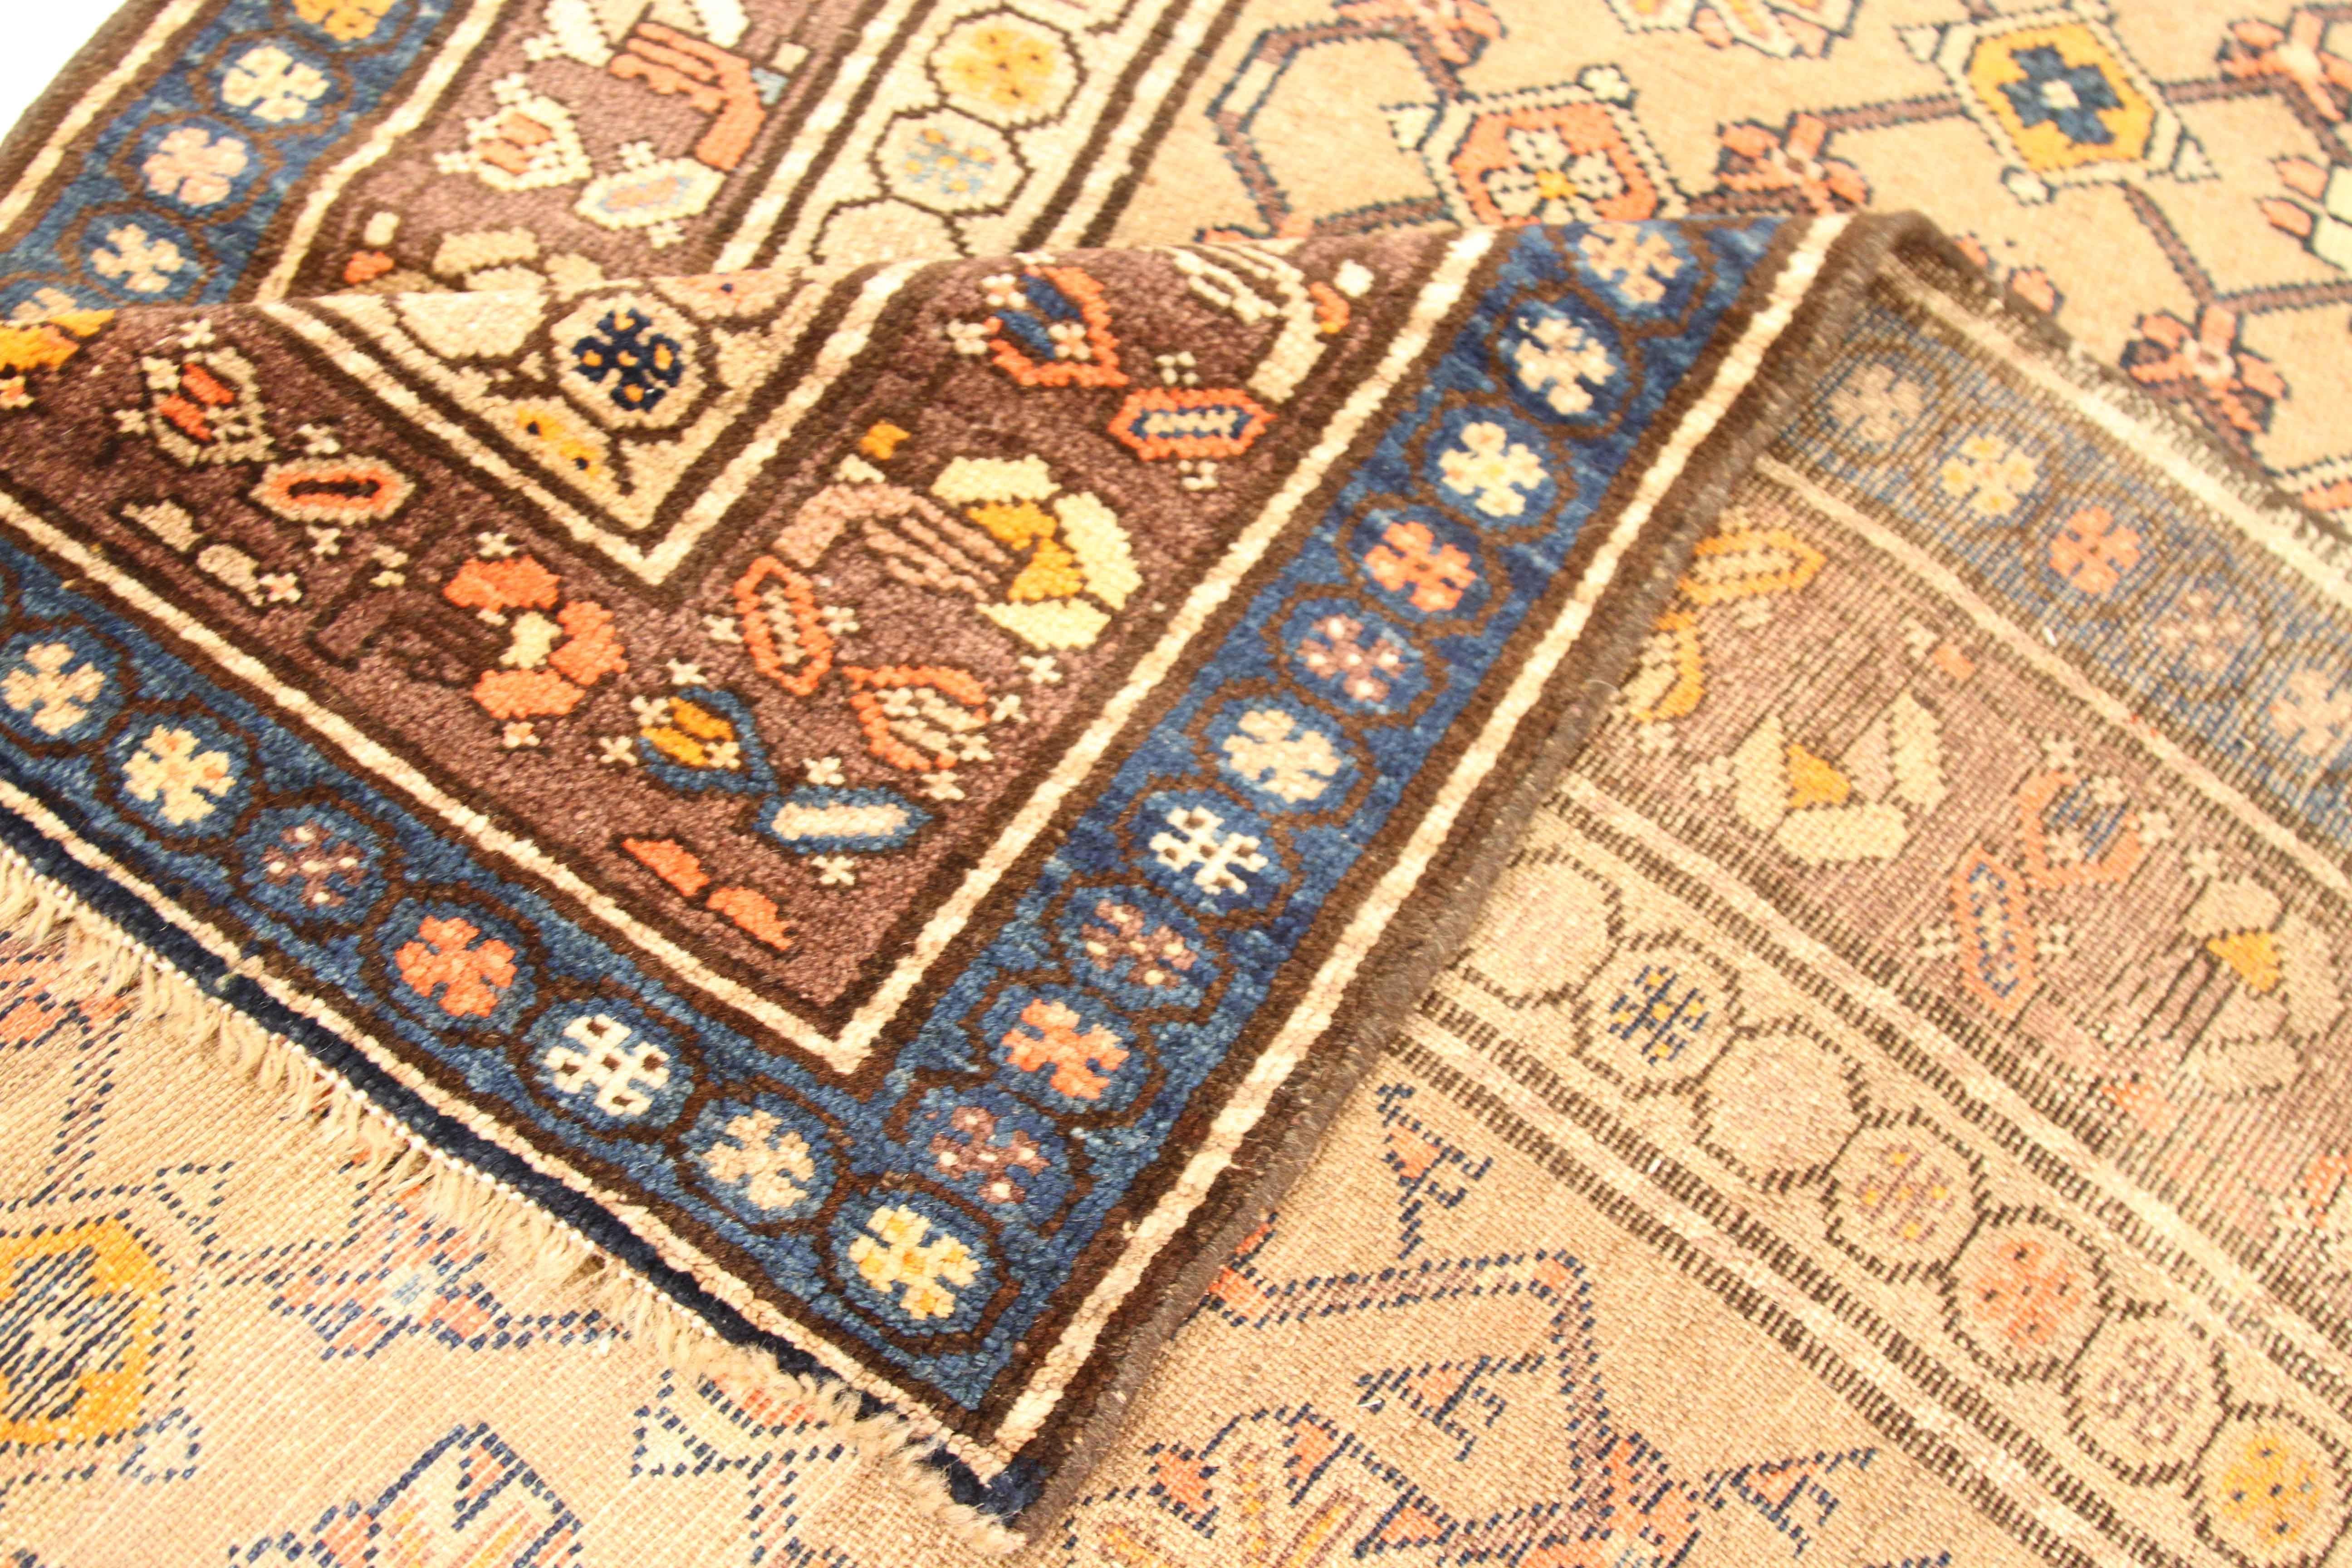 Antique Persian runner rug handwoven from the finest sheep’s wool and colored with all-natural vegetable dyes that are safe for humans and pets. It’s a traditional Malayer design featuring blue, orange, and red floral and geometric details over a